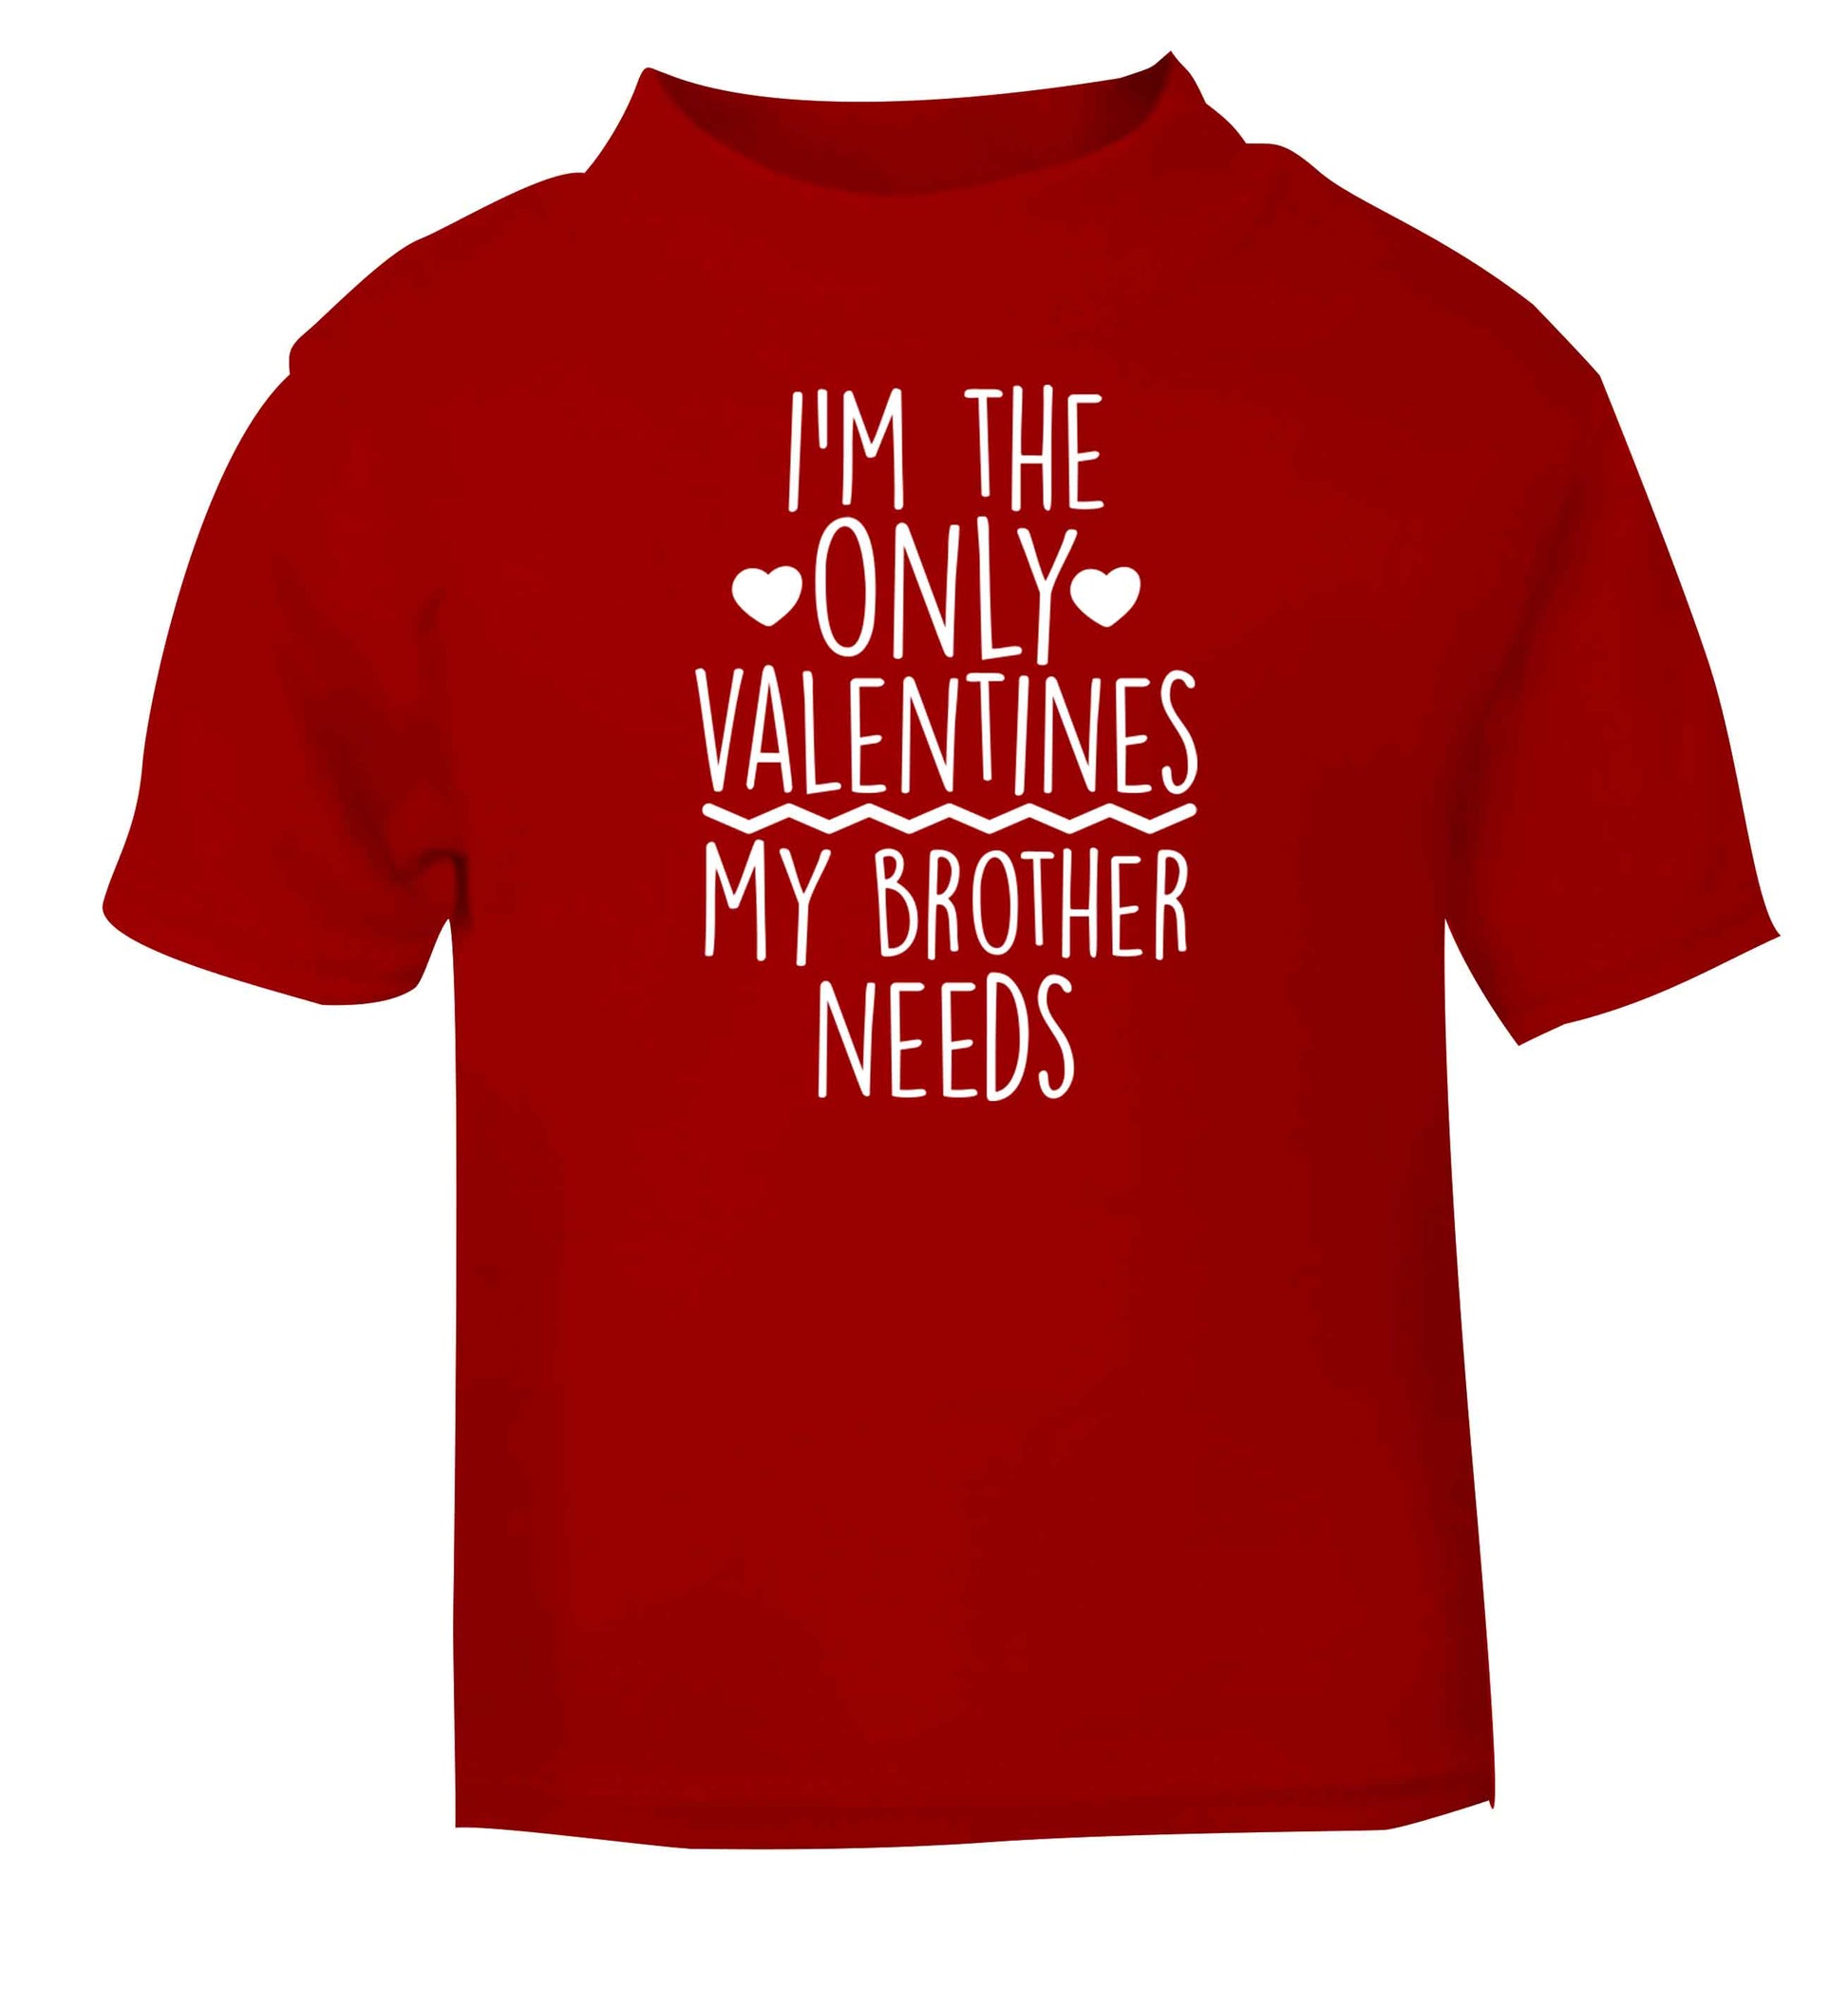 I'm the only valentines my brother needs red baby toddler Tshirt 2 Years